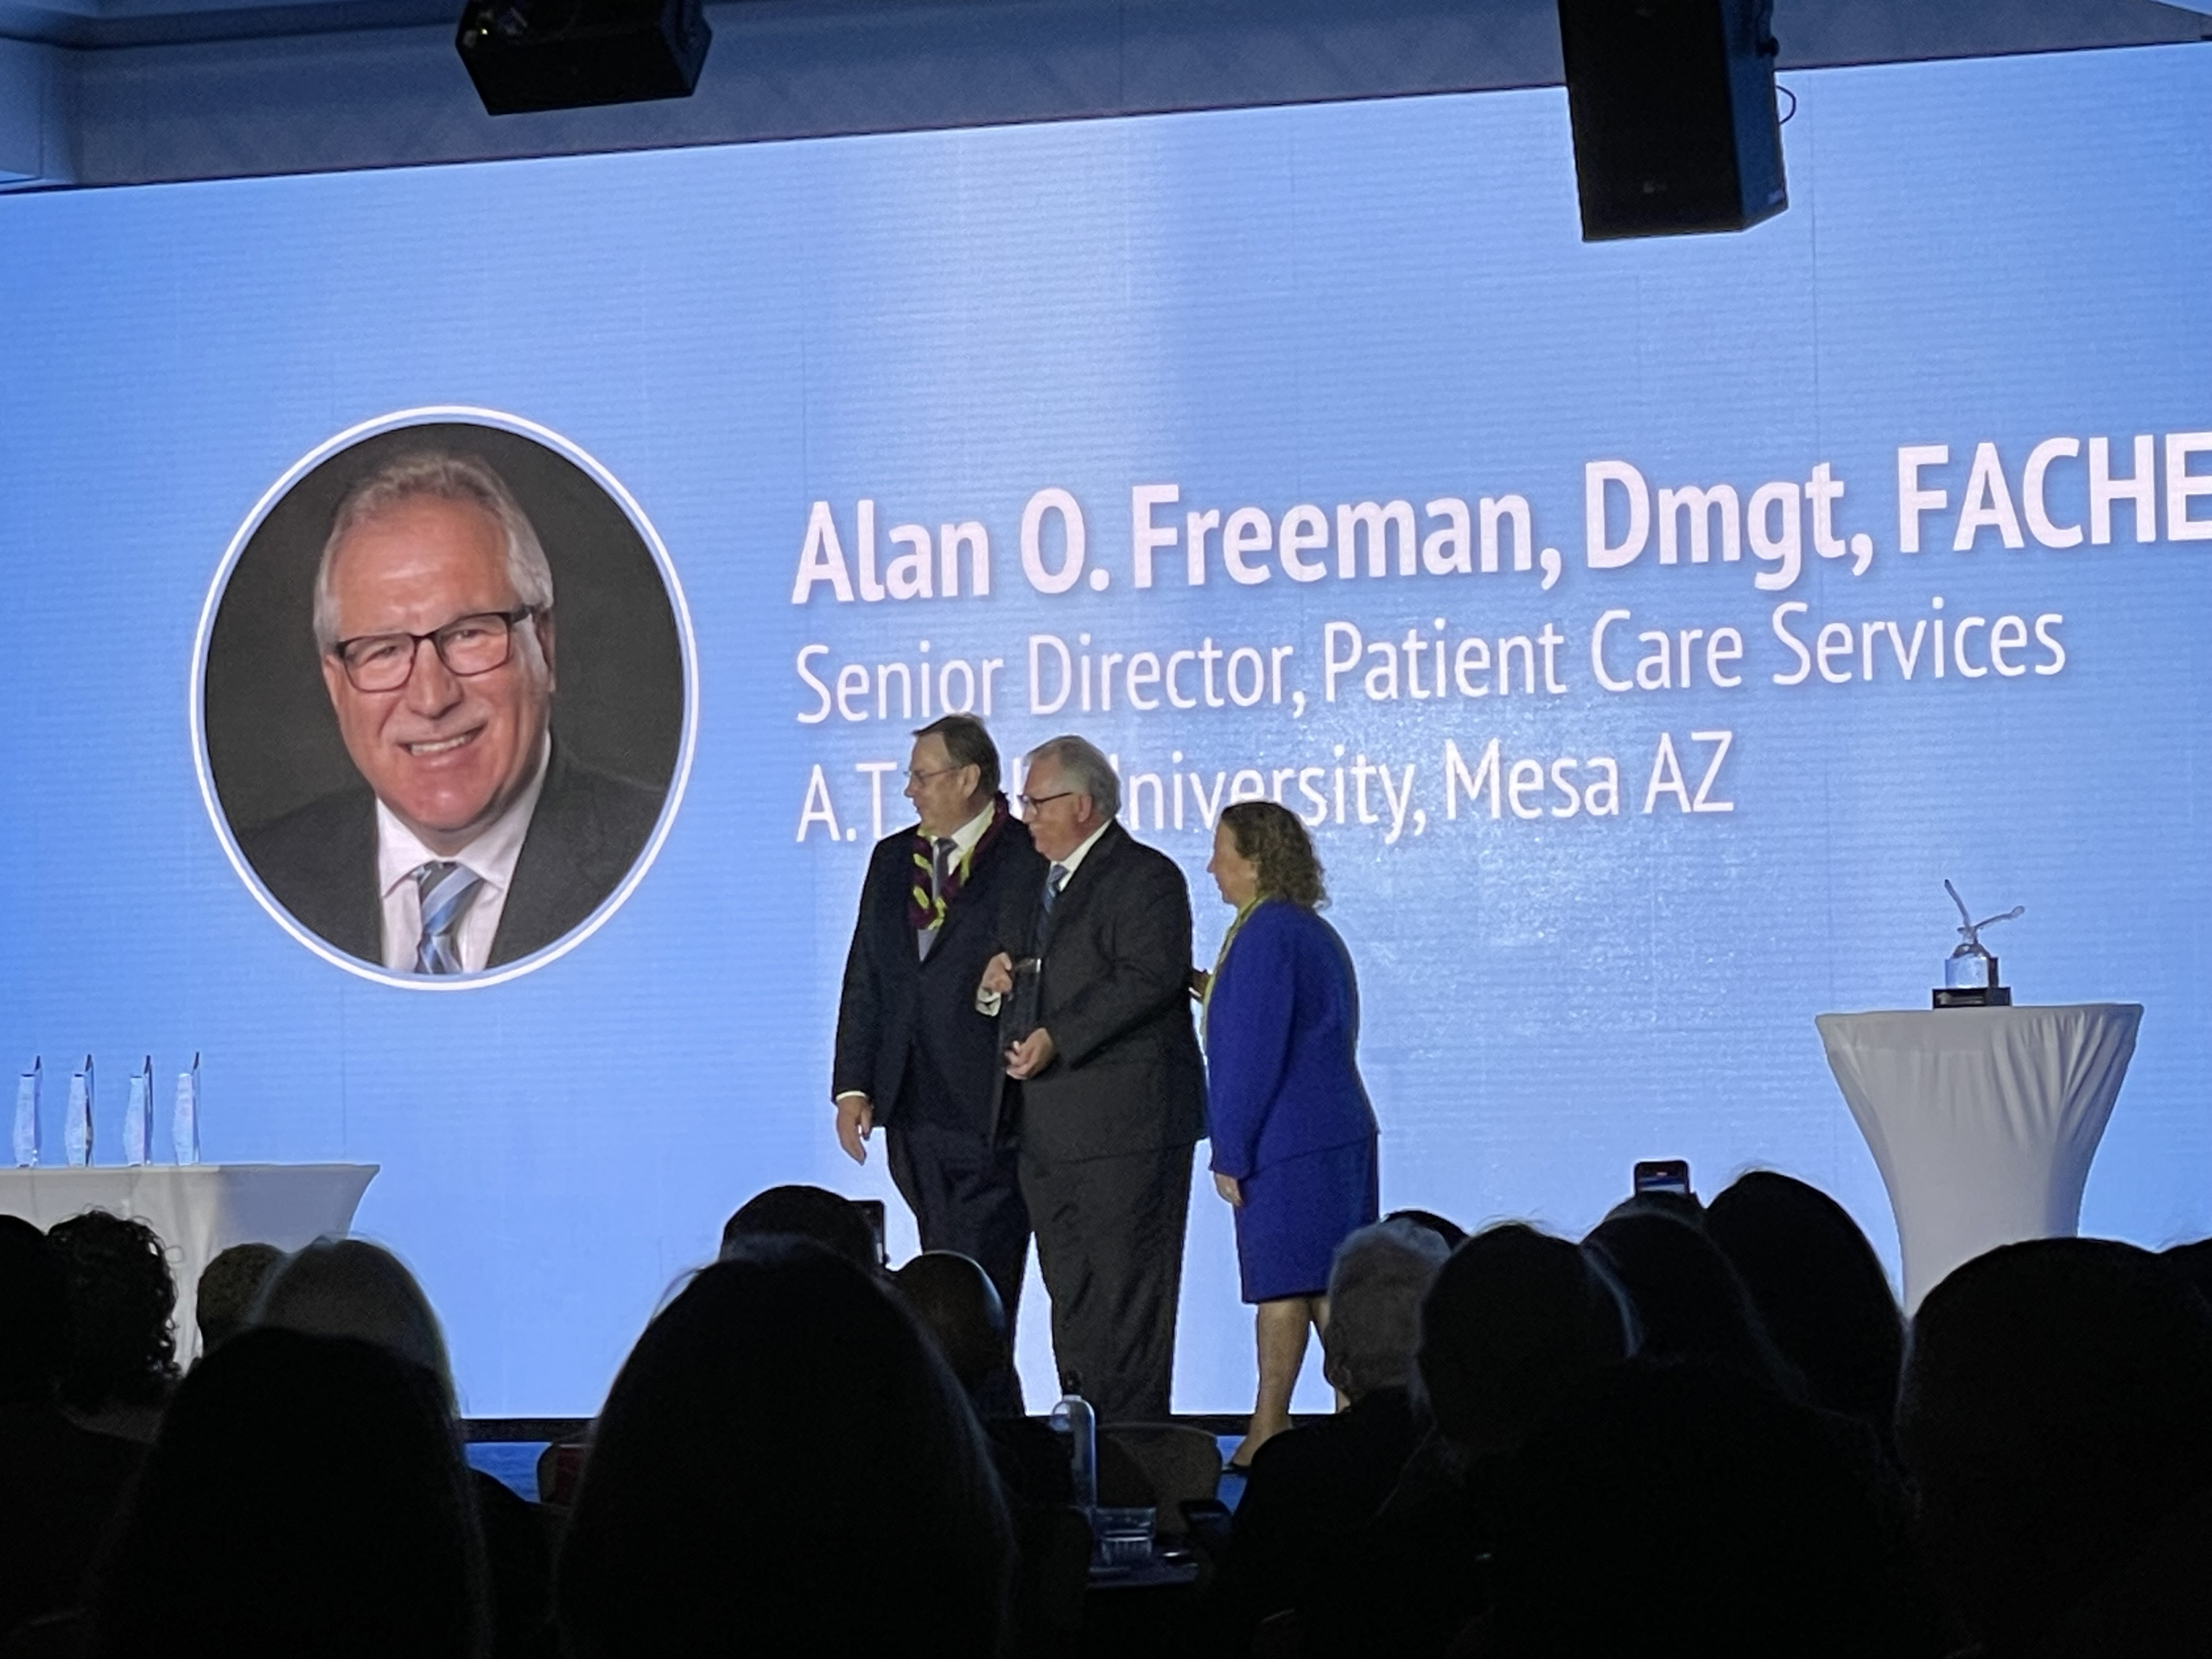 People are pictured on stage. The award recipient's photo and name appear on a large screen behind them.